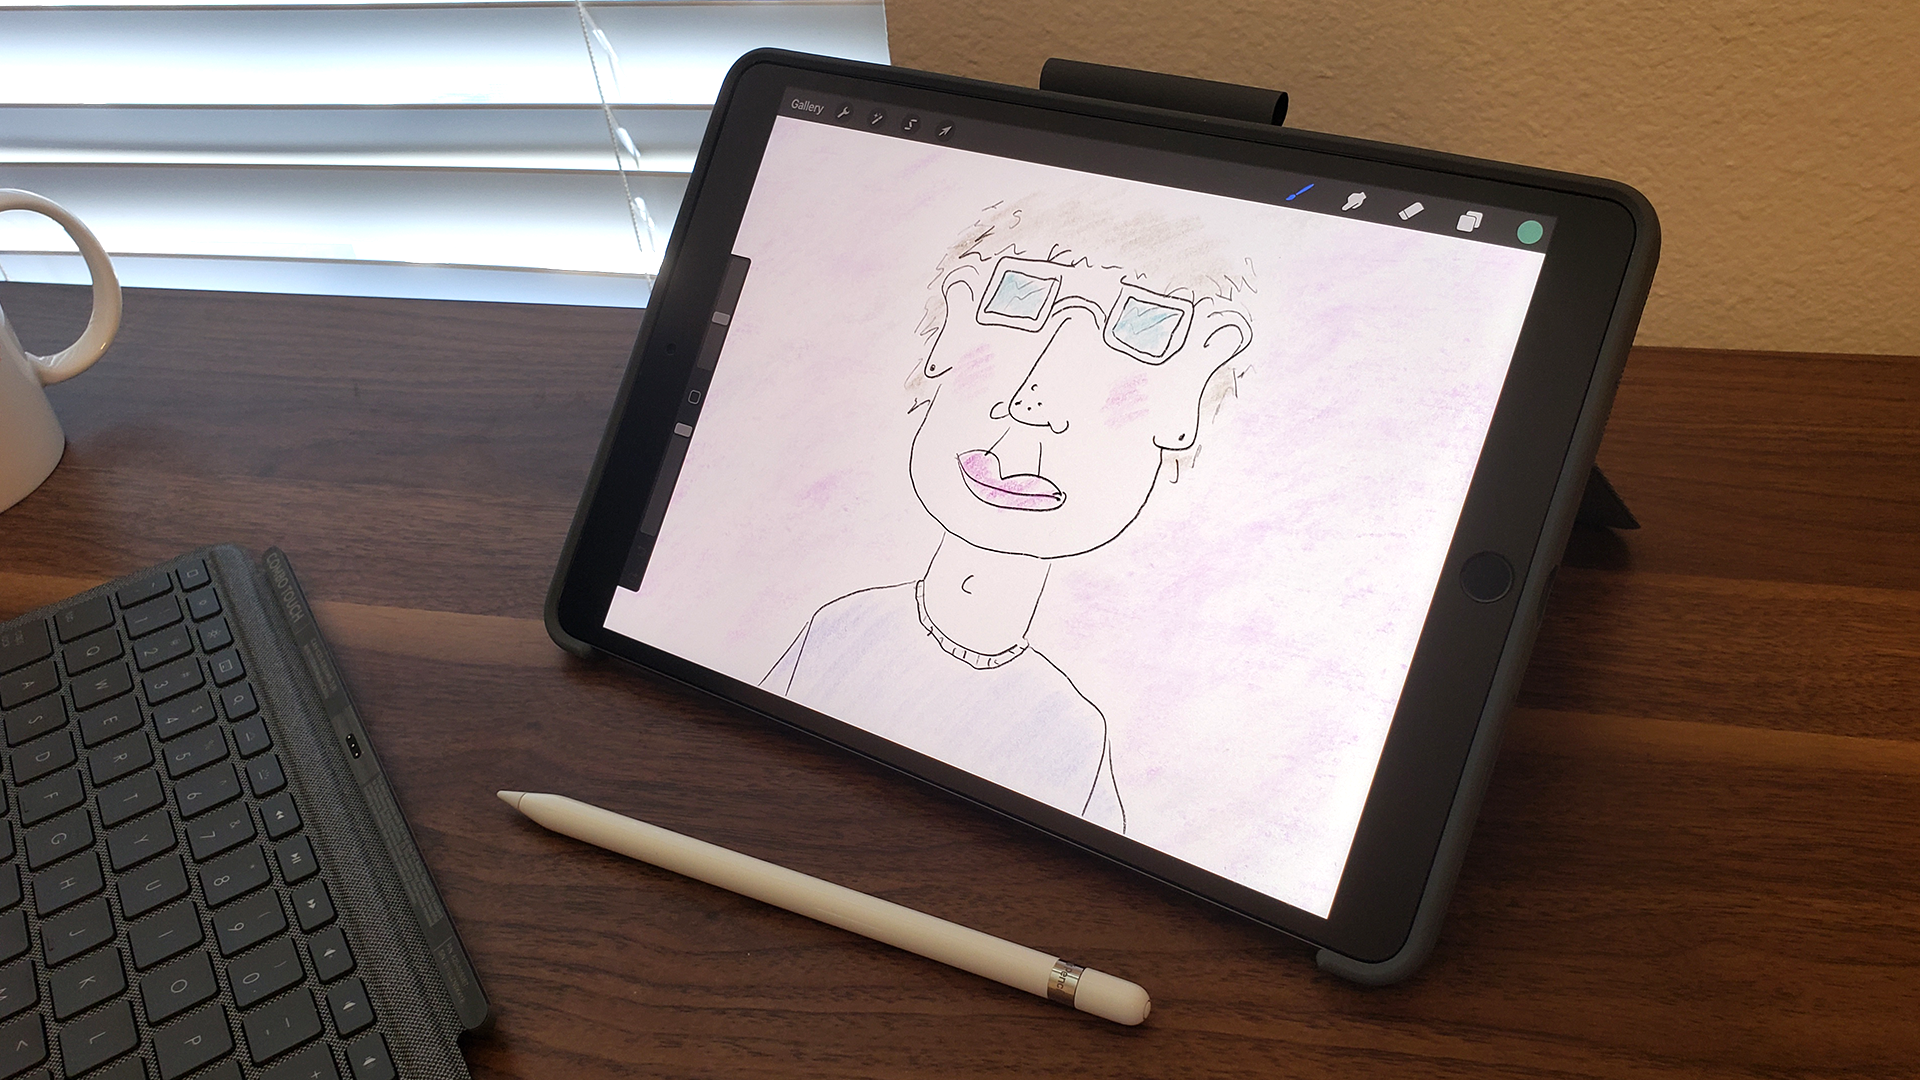 It's bulky, but the Combo Touch case is comfortable for drawing.